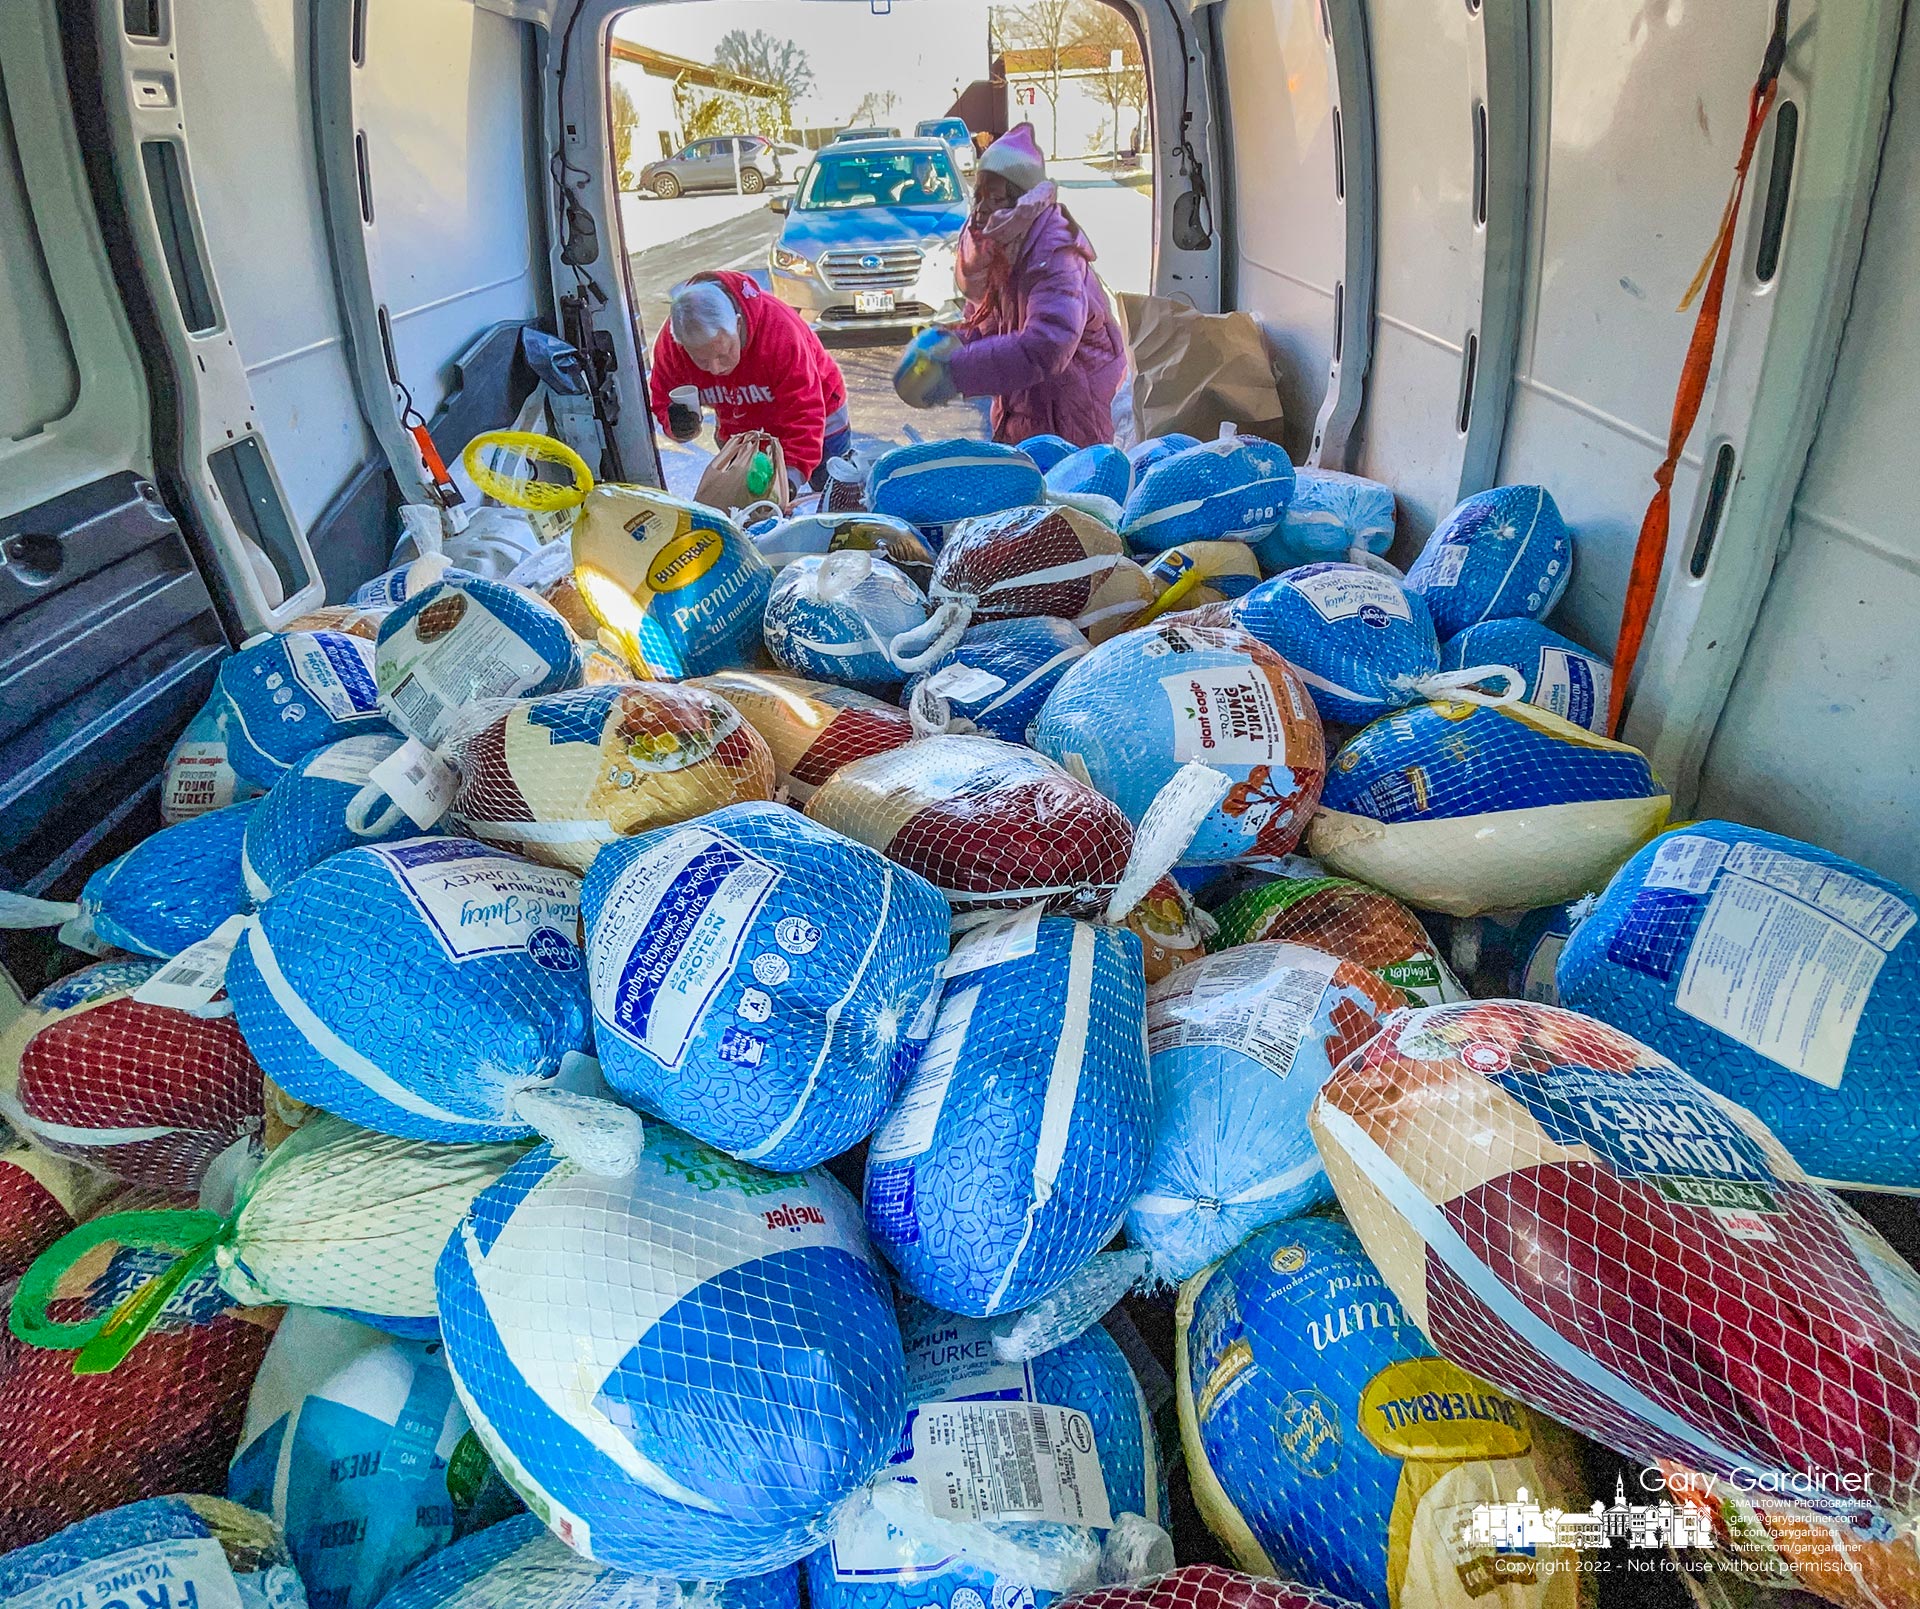 Frozen turkeys are stacked in a van at St. Paul the Apostle Catholic Church where they will be delivered to Holy Rosary/St. John Catholic Church in downtown Columbus for the church's food kitchen at Thanksgiving. My Final Photo for November 20, 2022.